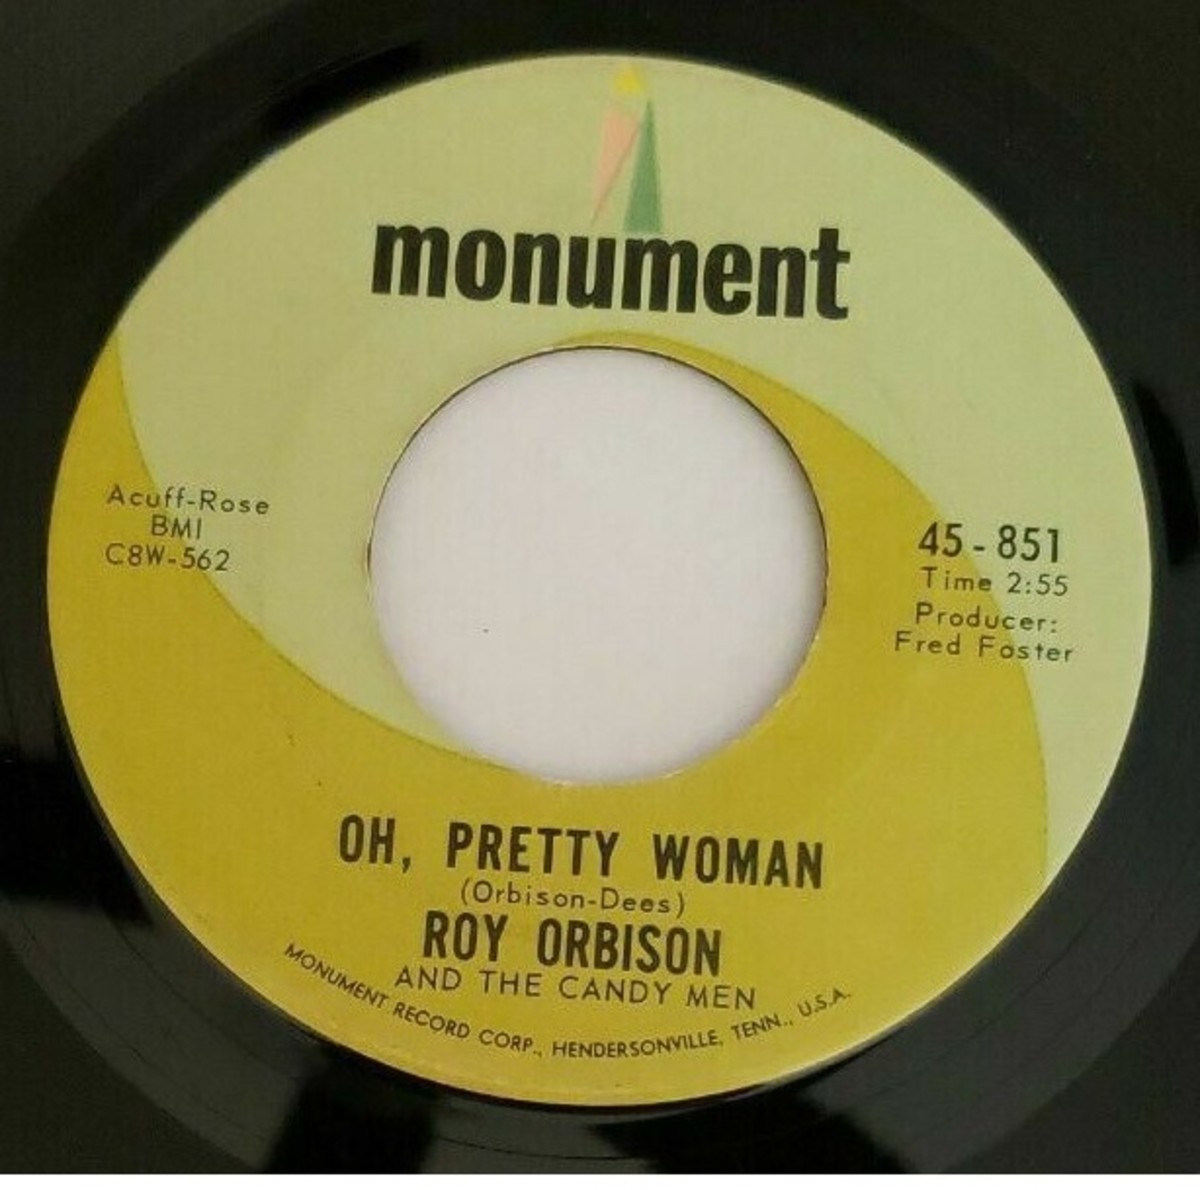 Monument Records released "(Oh), Pretty Woman" as a single in August 1964 and it spent three weeks at number one!